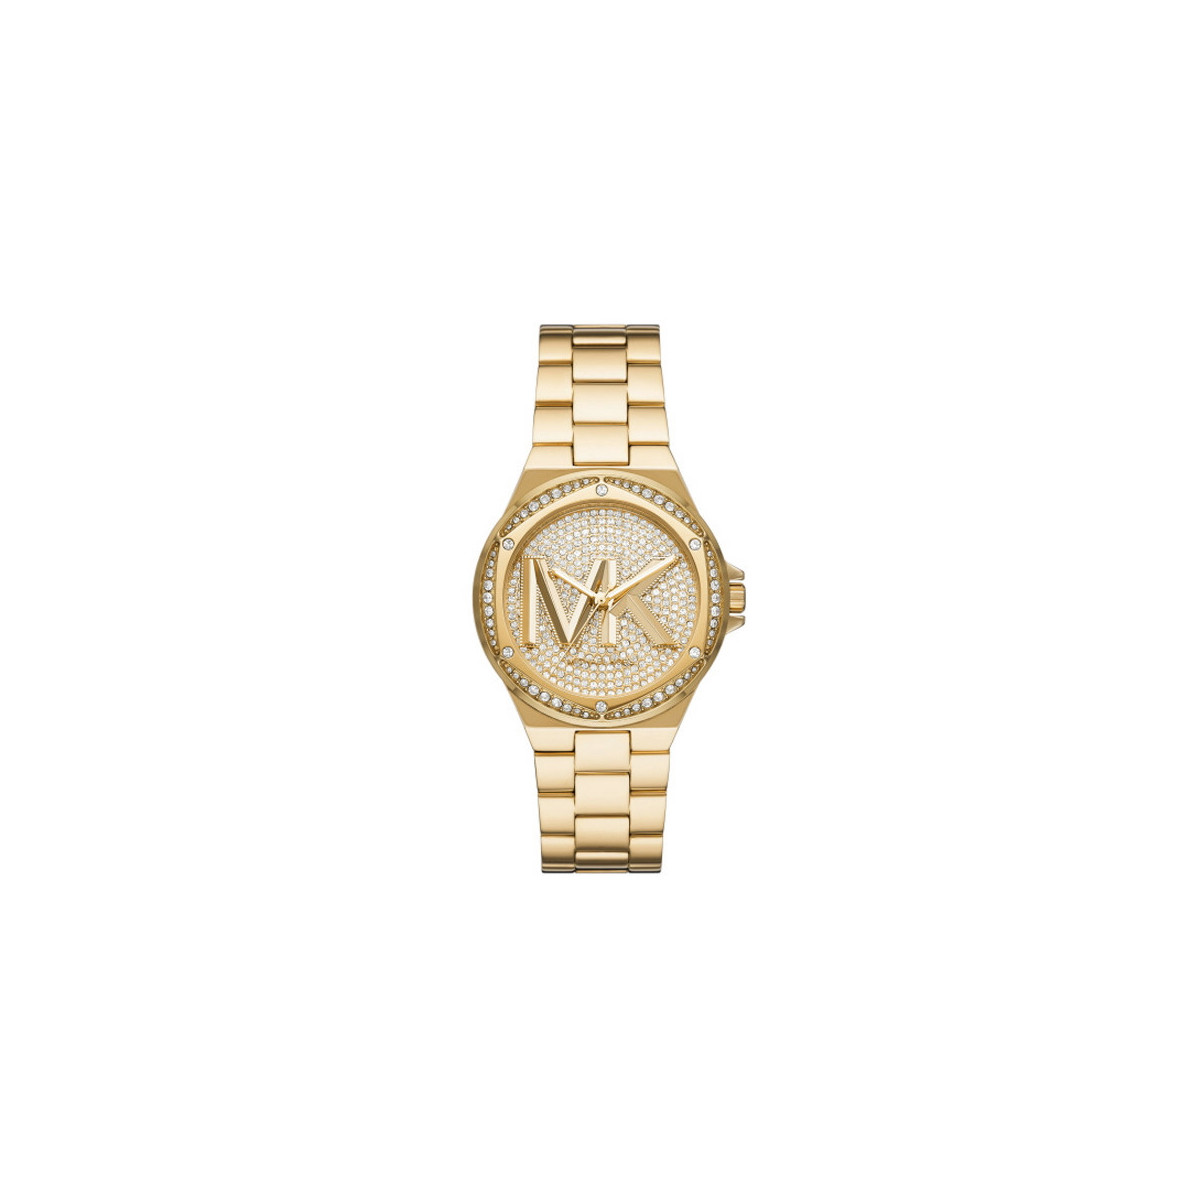 LENNOX GOLD TONE WATCH WITH INLAY MK7229